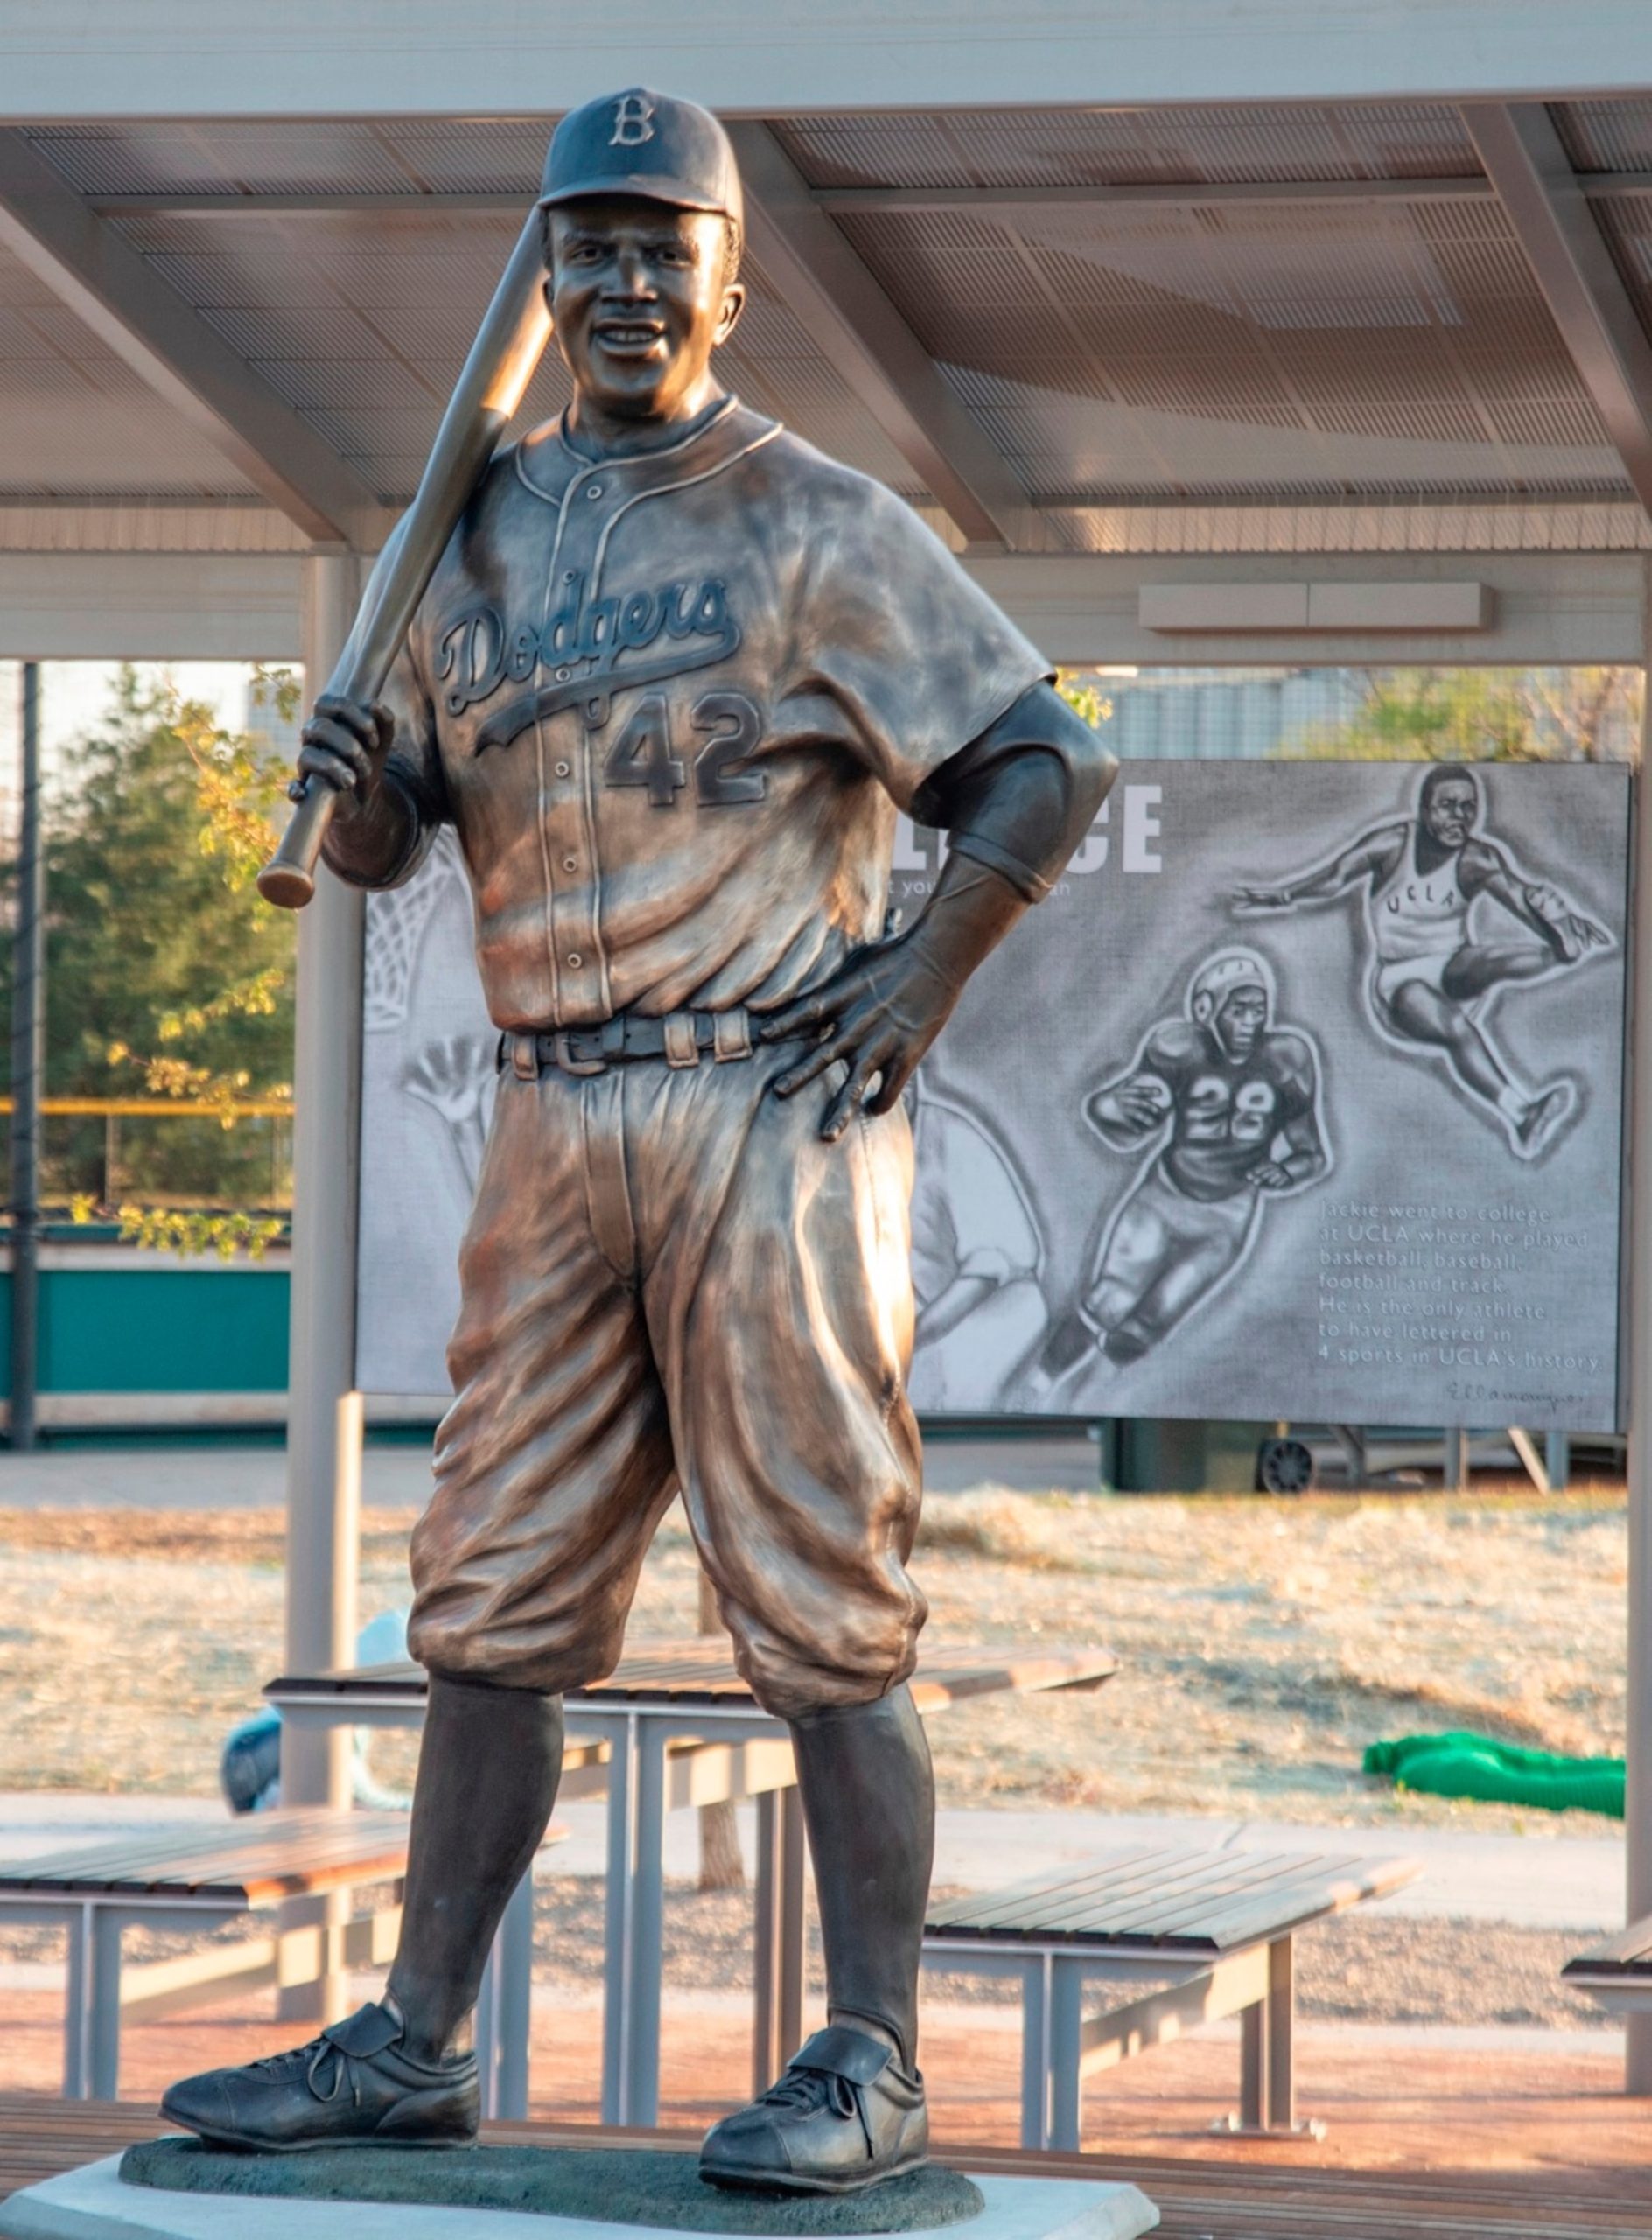 Man charged in theft of destroyed Jackie Robinson statue, authorities still searching for other suspects